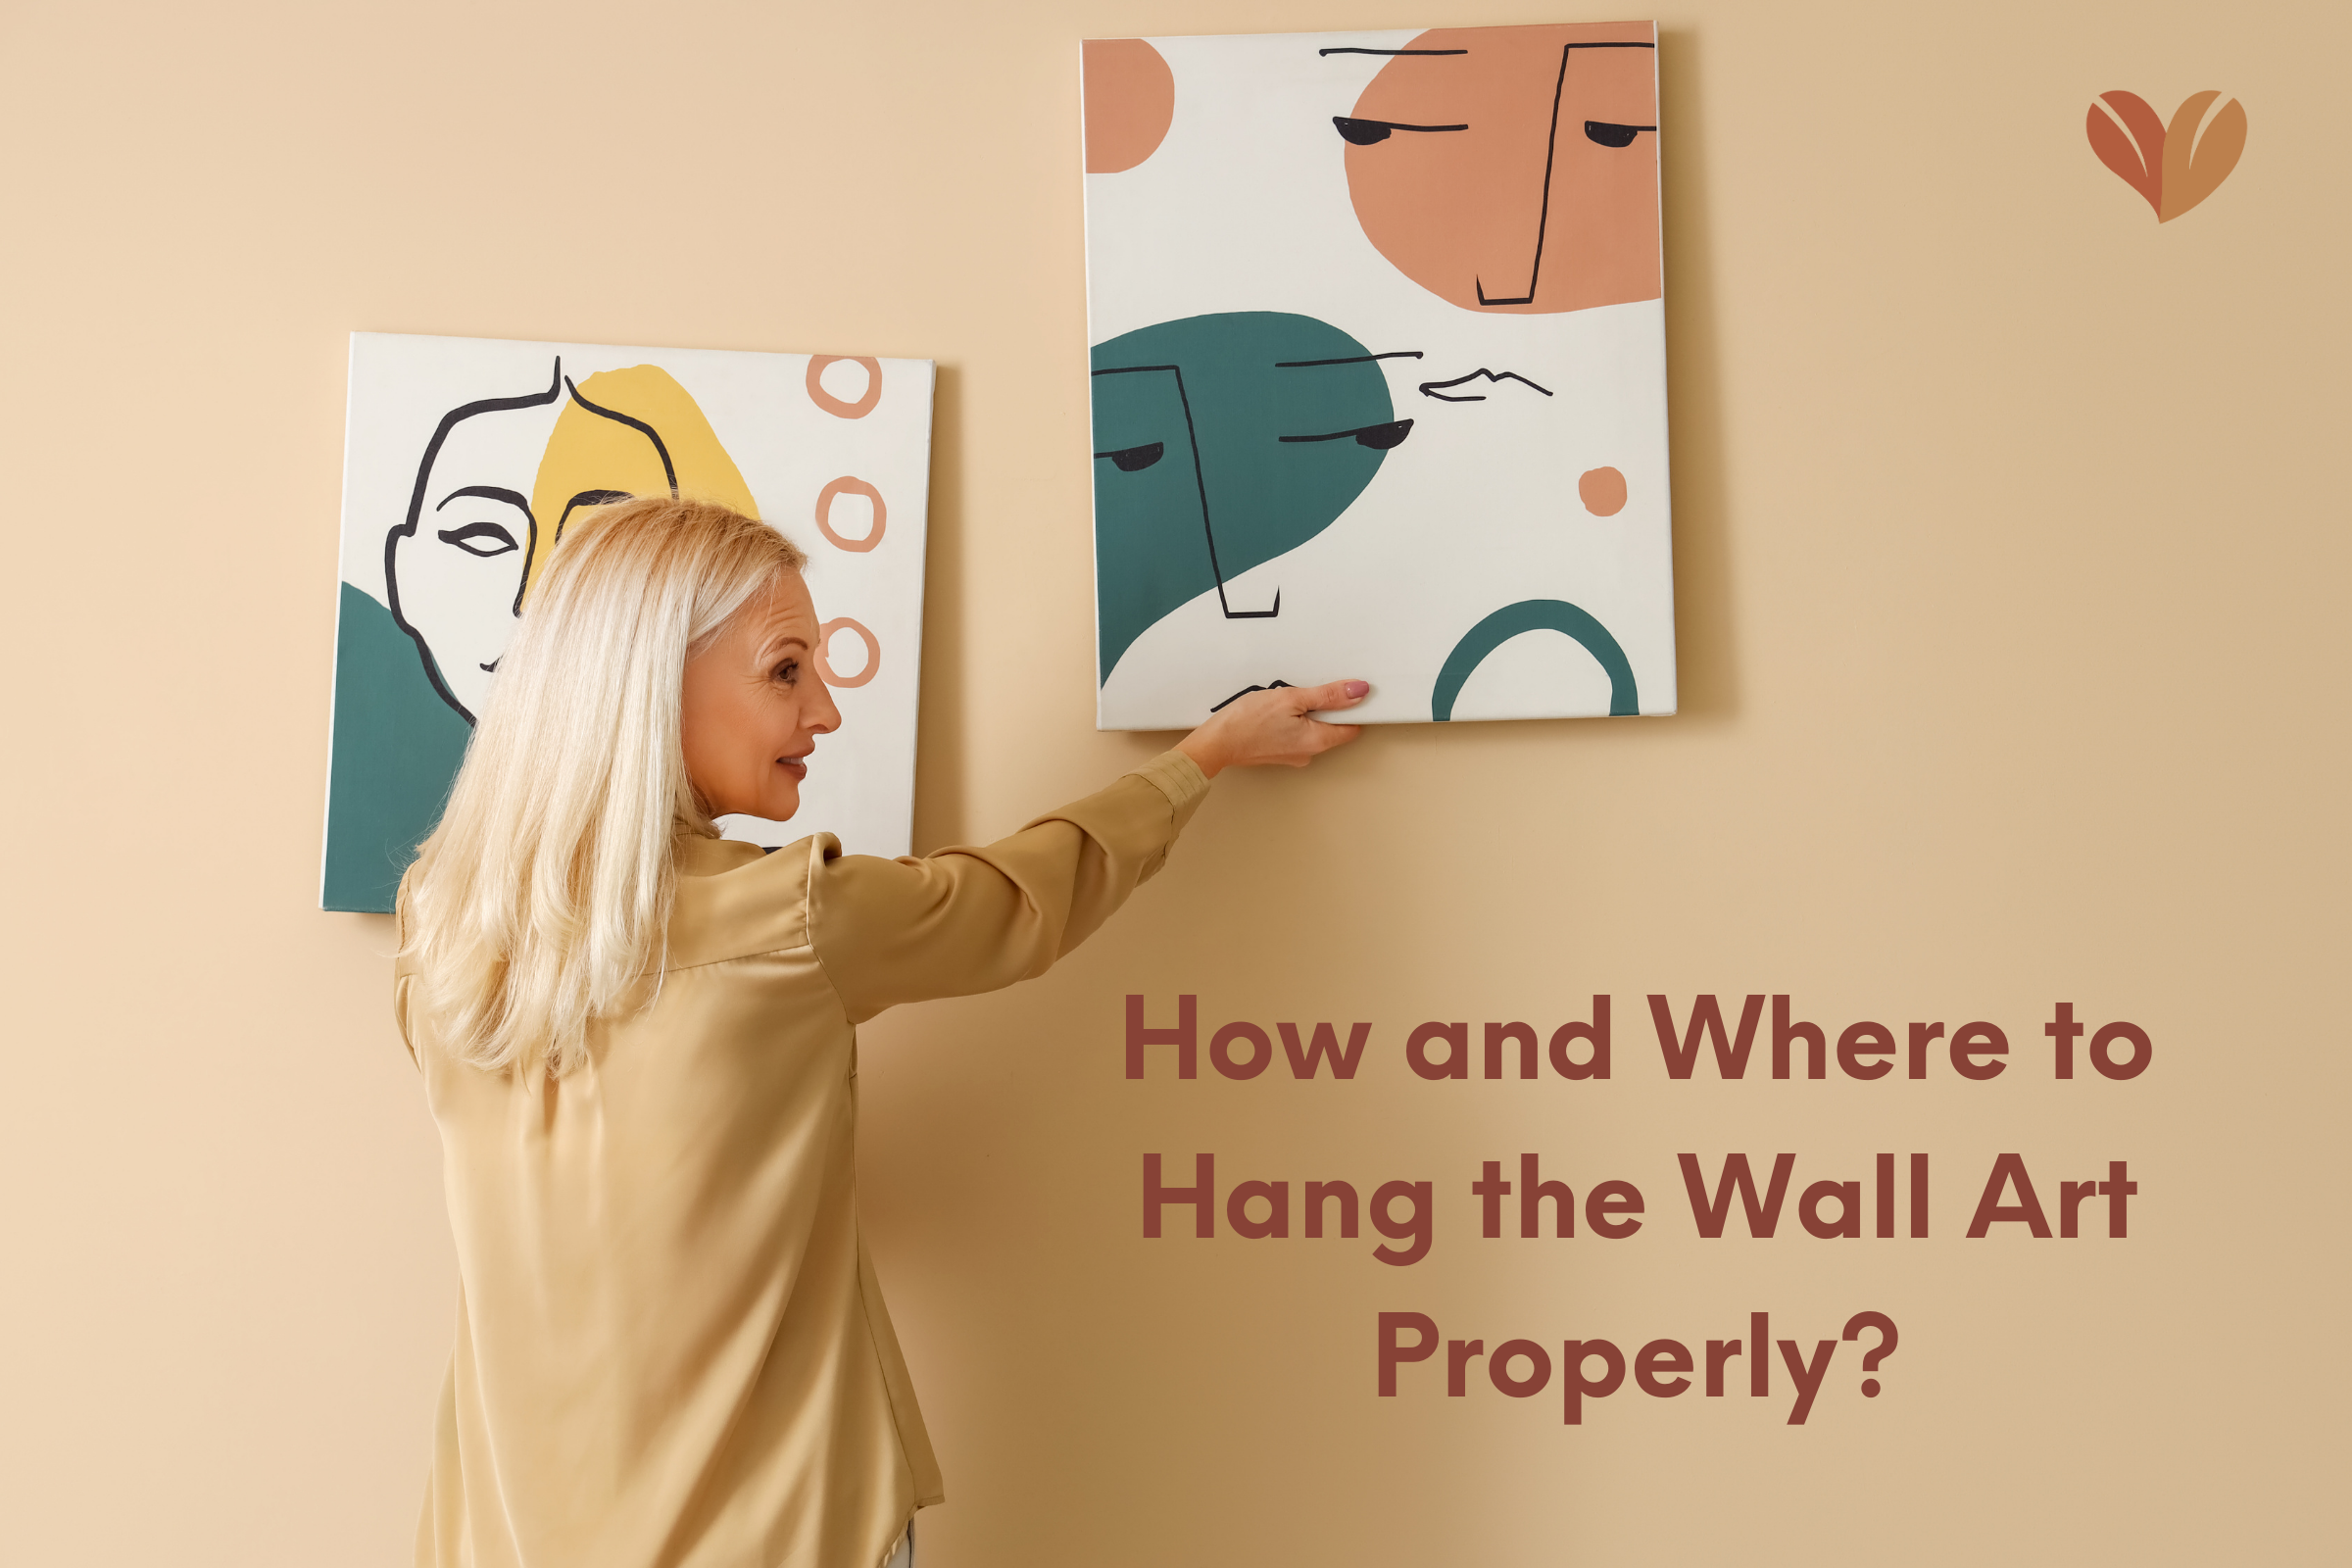 5 Essential Tips on Choosing the Best Wall Art Size for Your Space